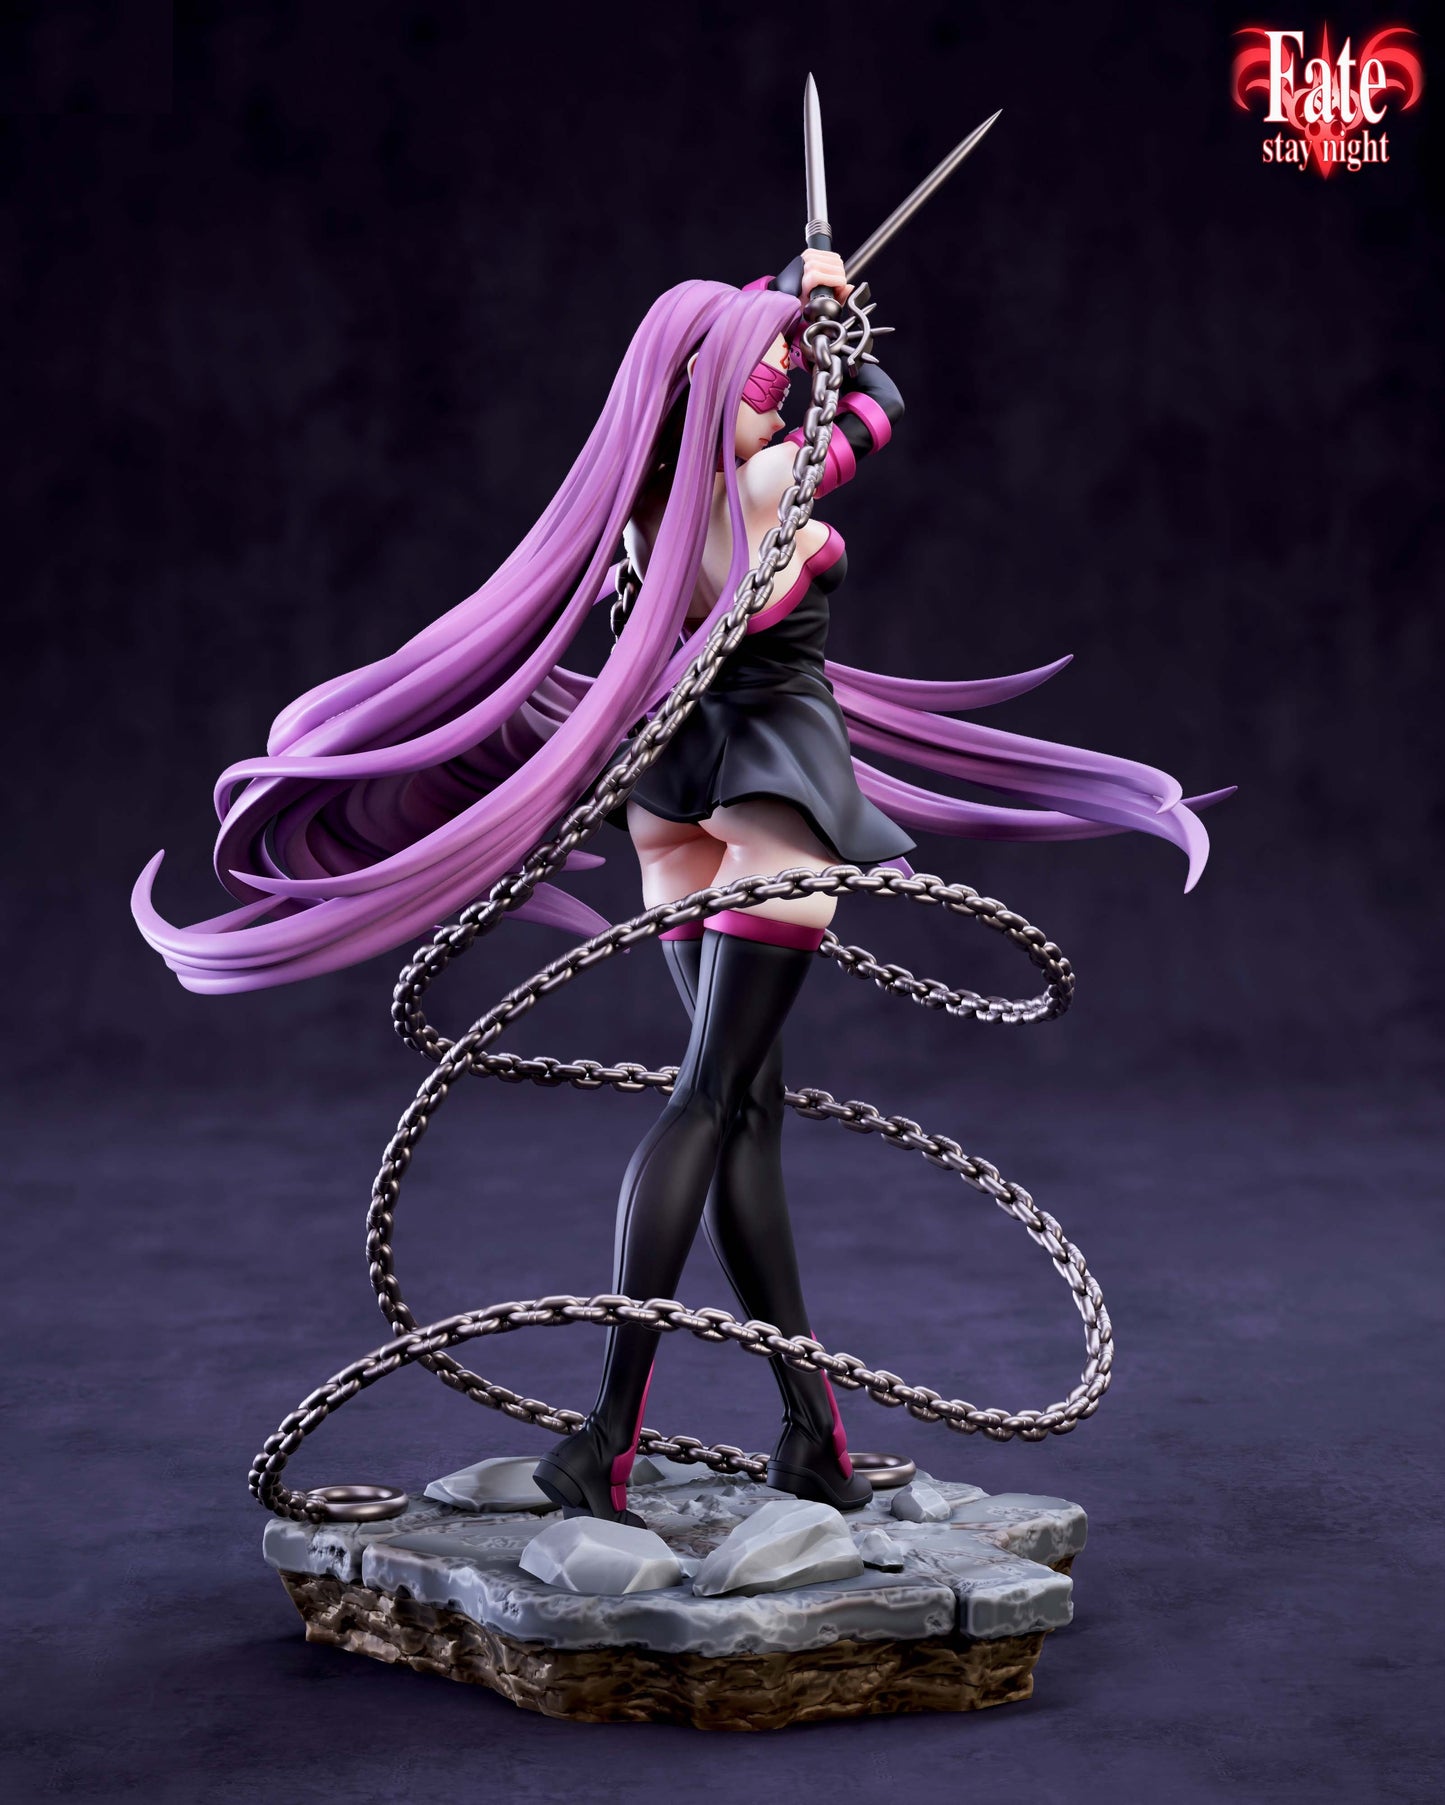 Fate Stay Night STL File 3D Printing Design Anime Character Medusa STL File 0102